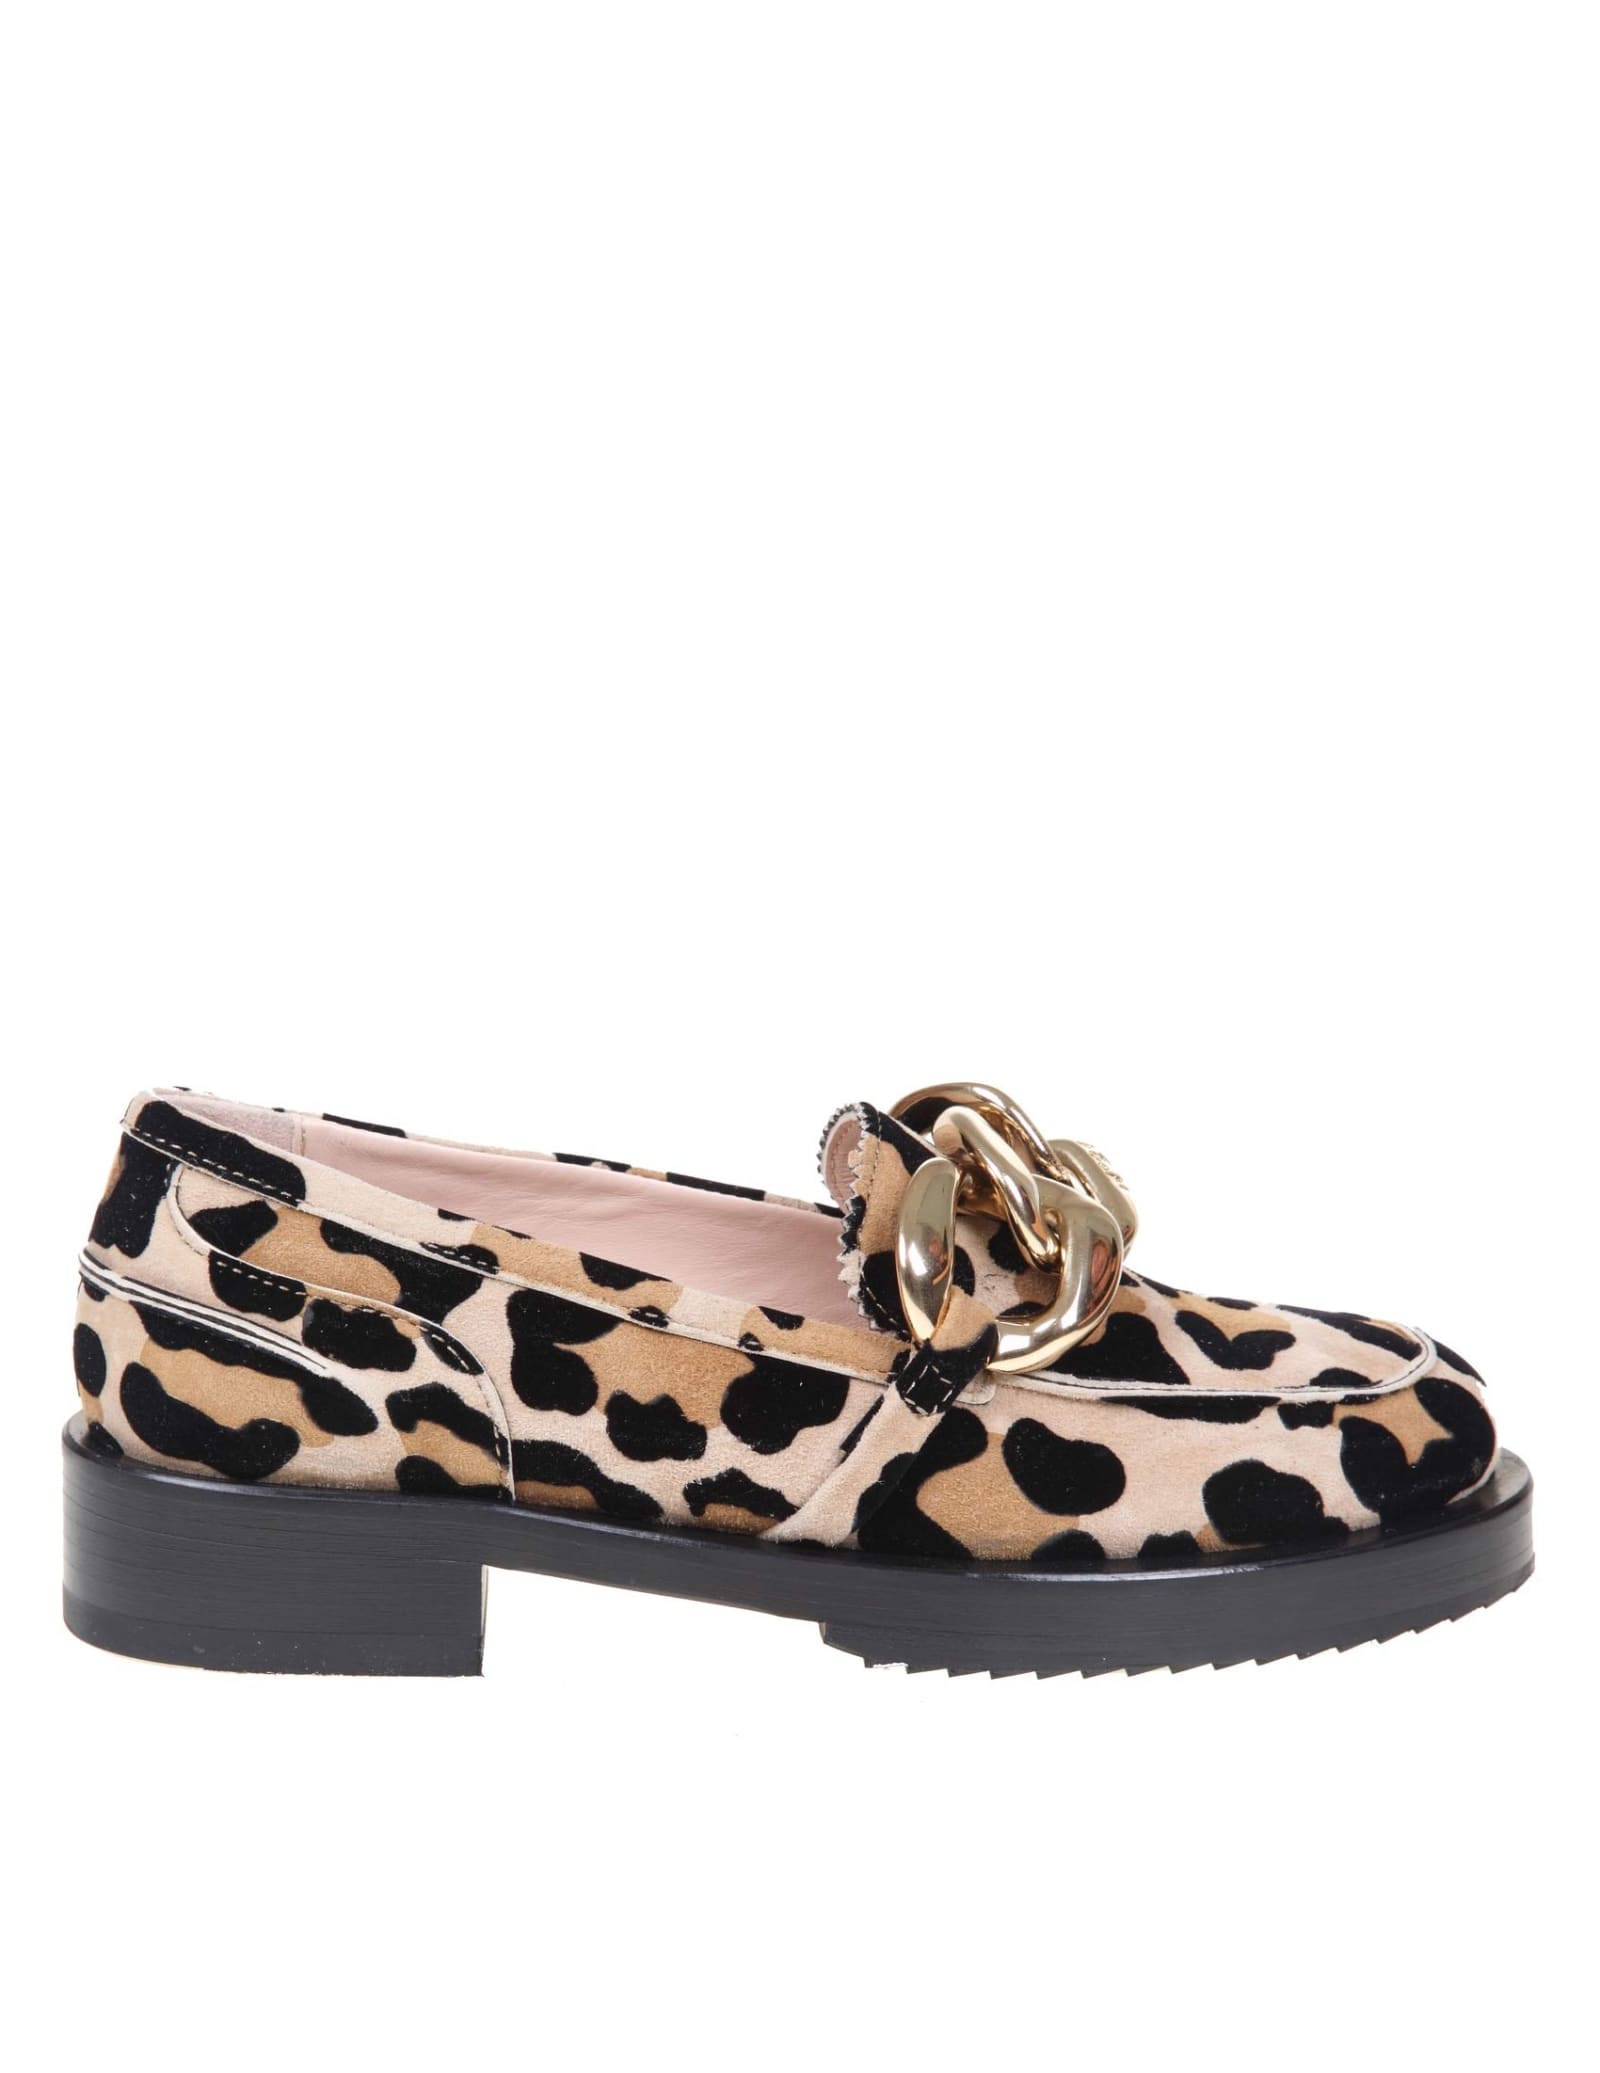 N.21 Animalier Suede Moccasin With Oversized Chain